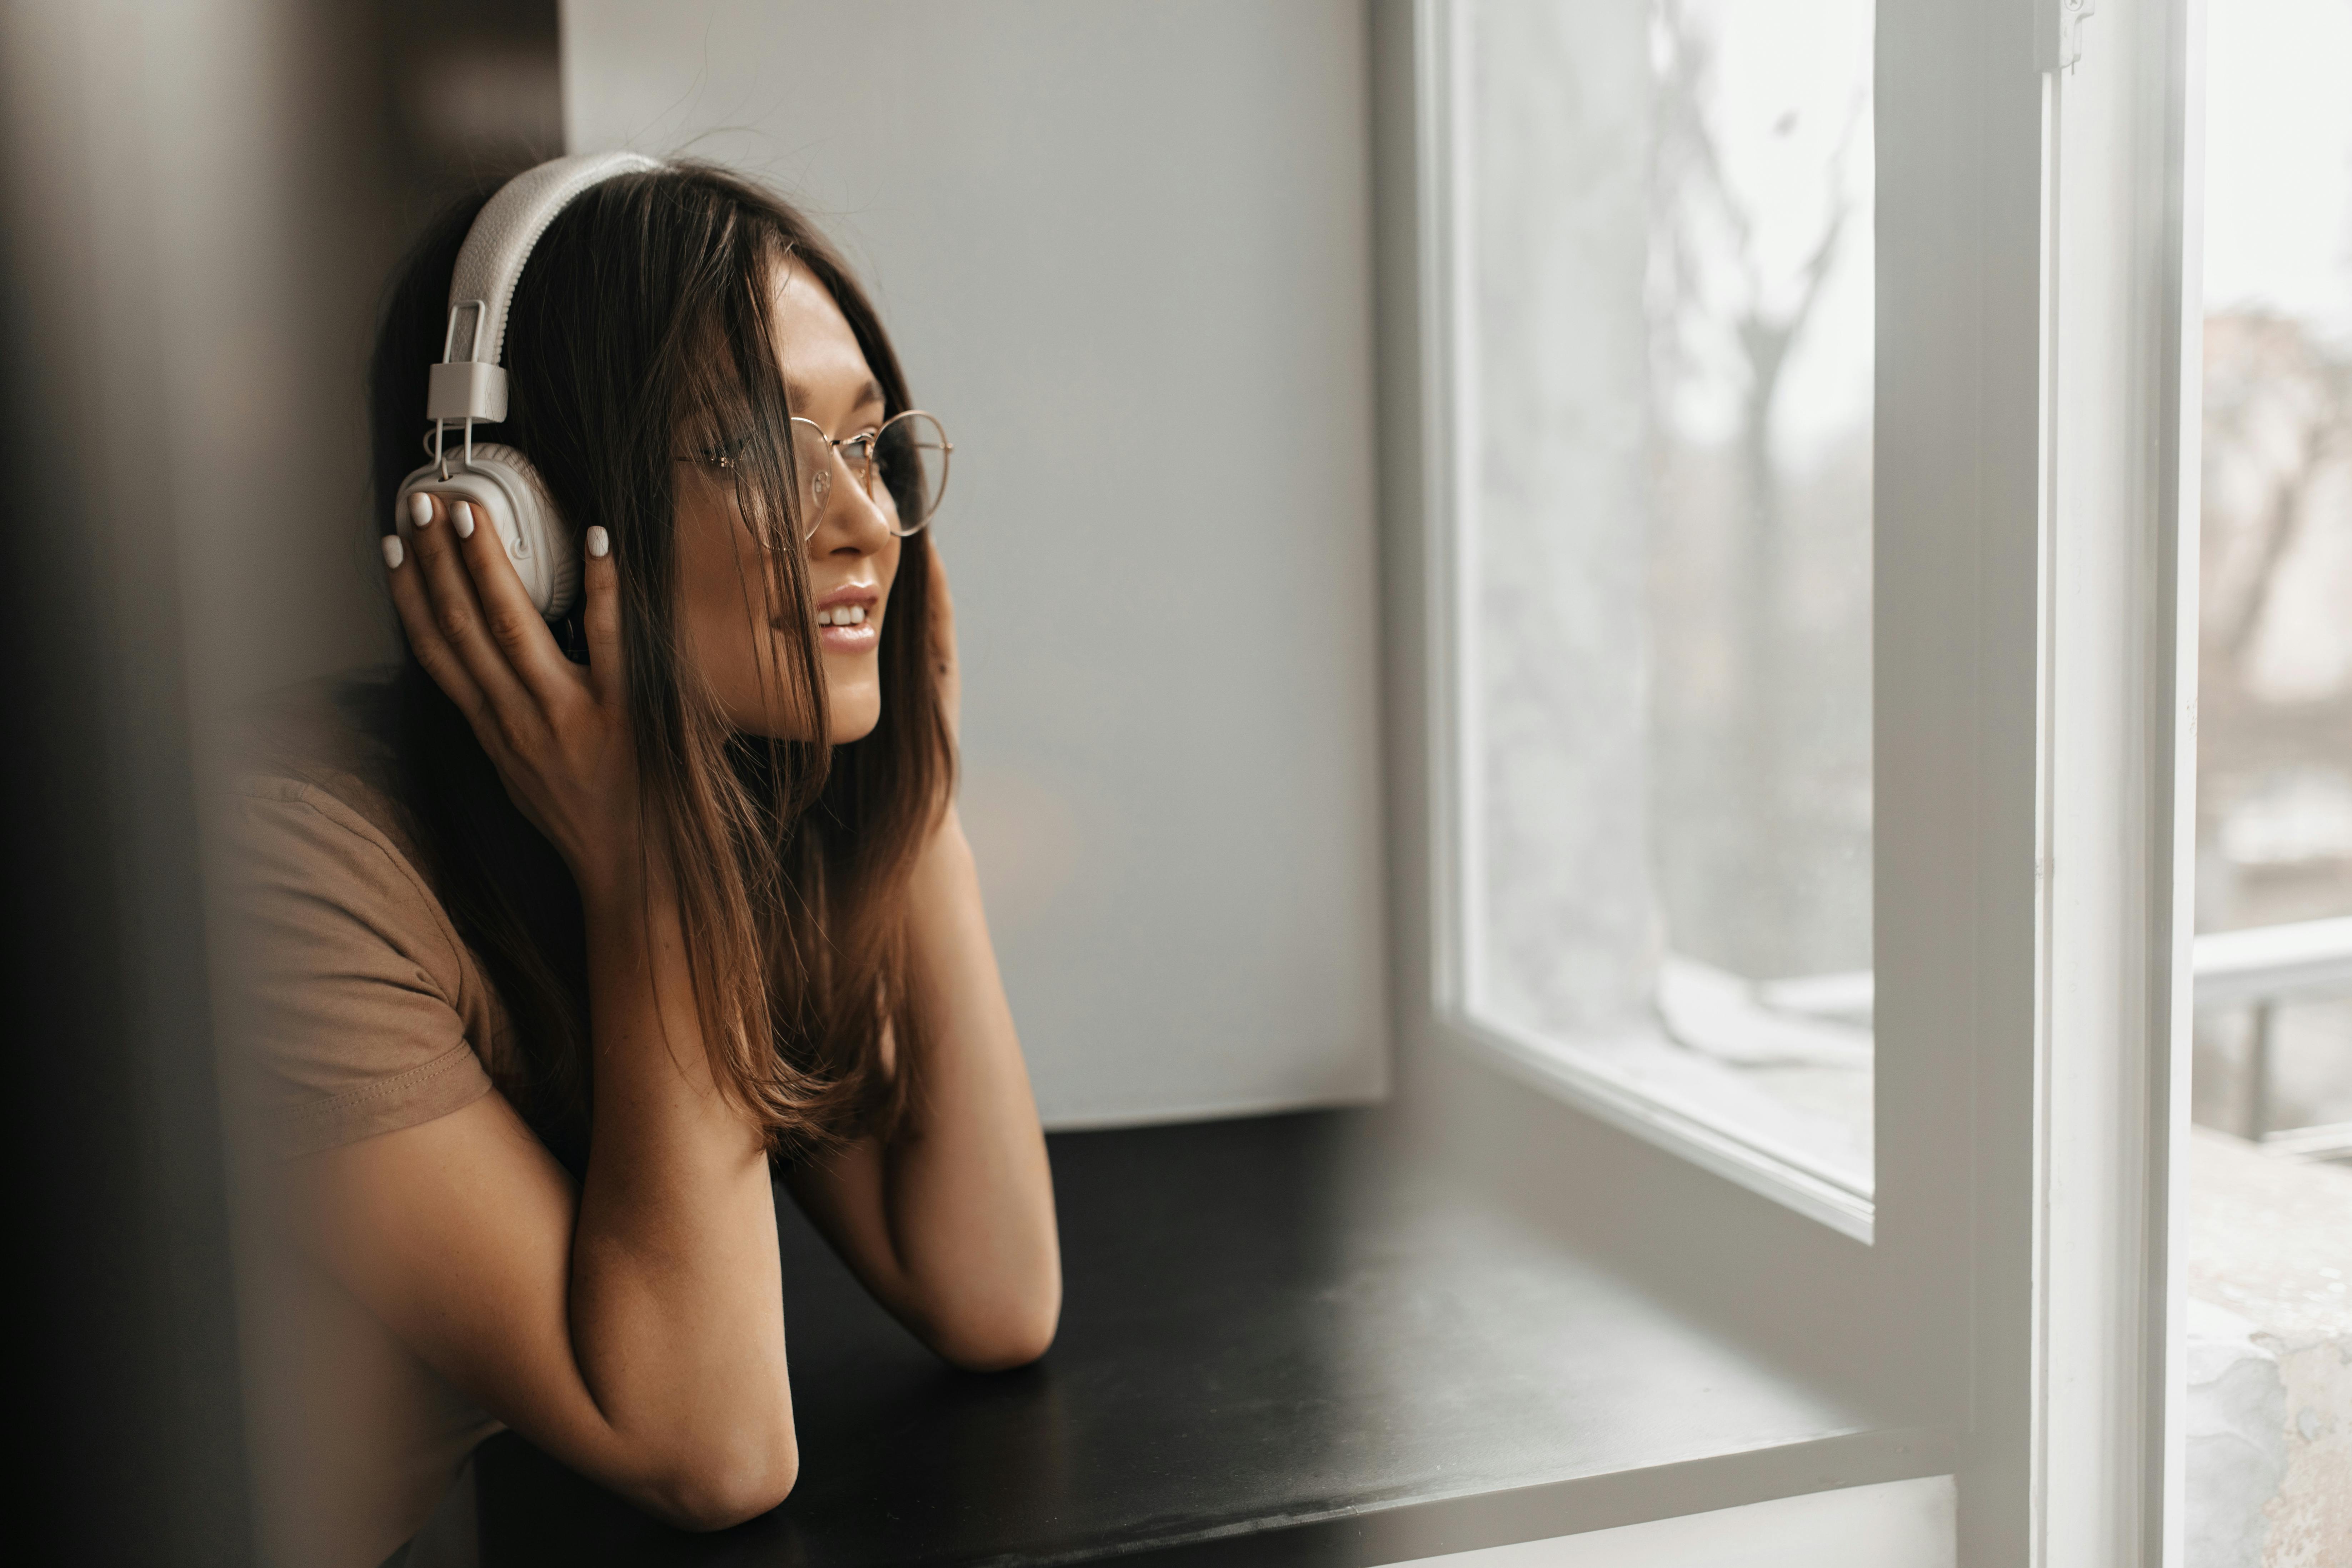 Young tan woman looks calm while listening to music and looking out a window. 